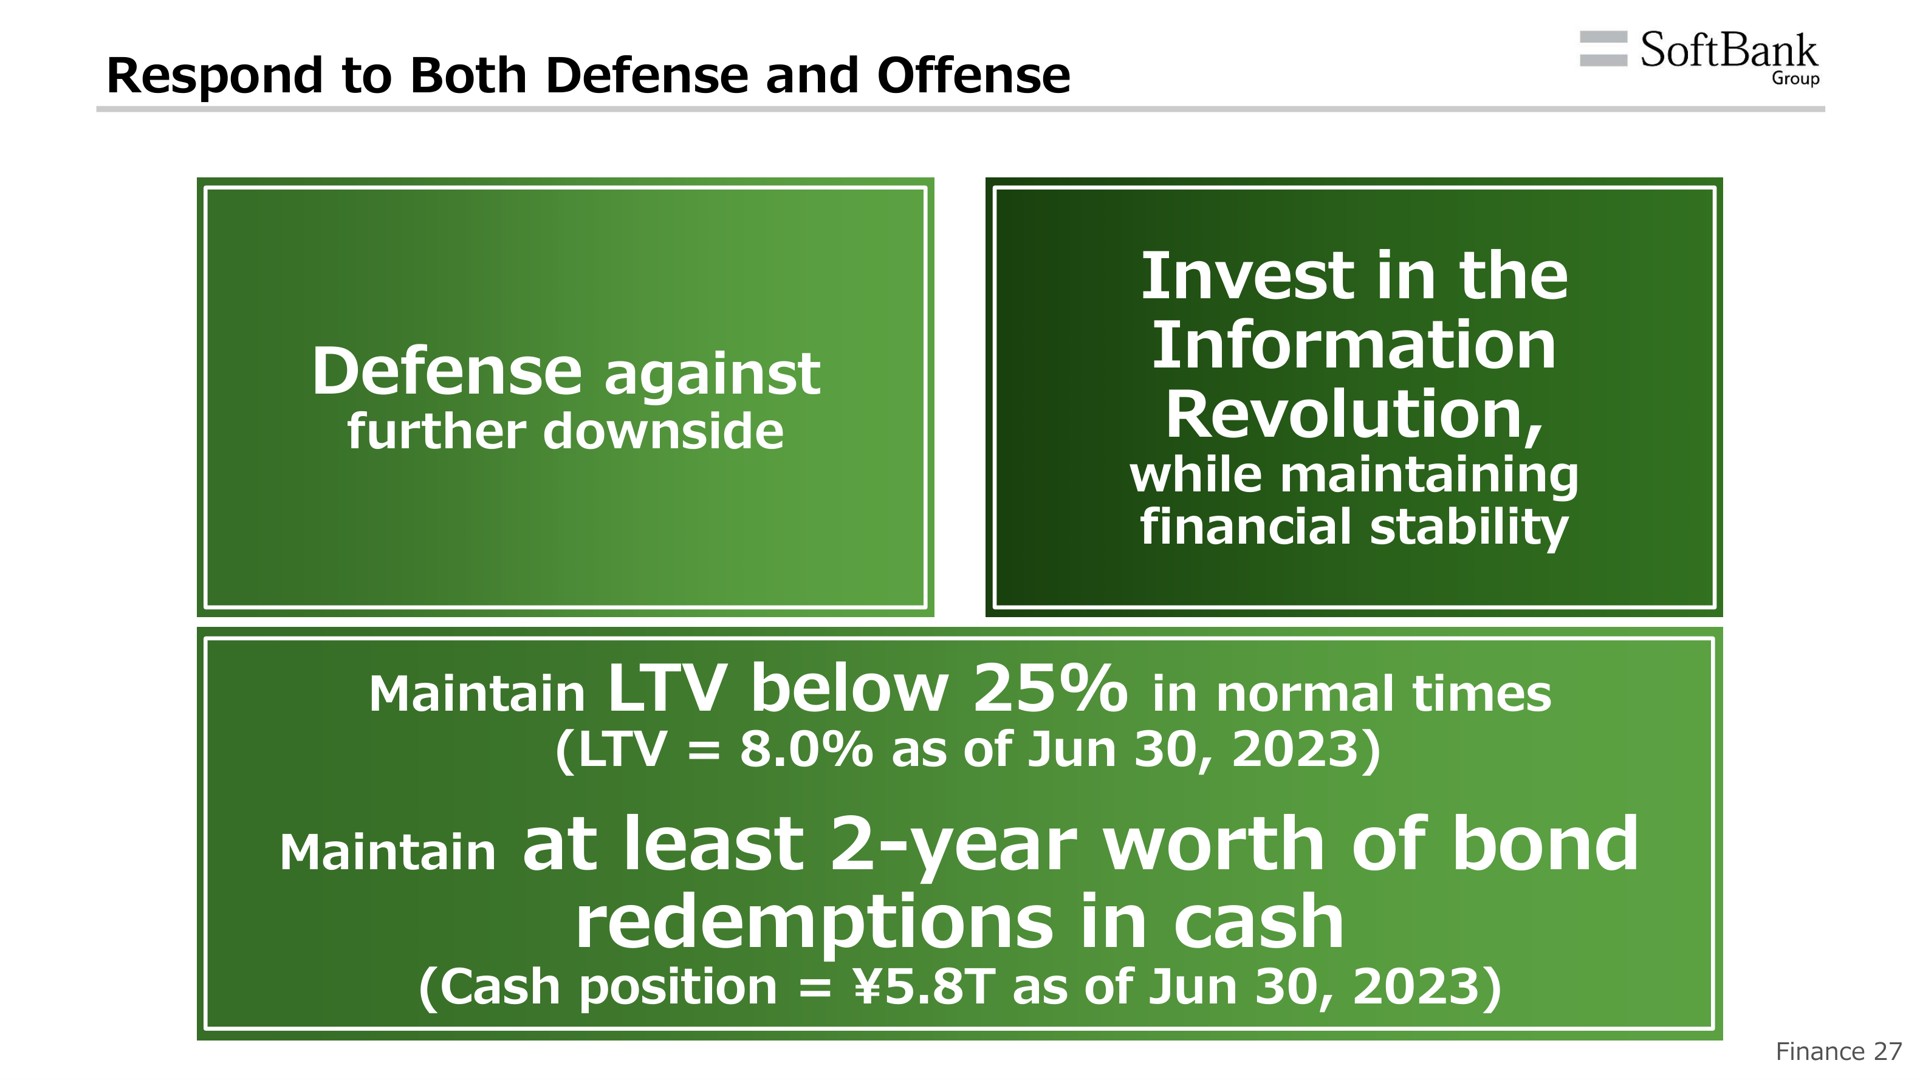 respond to both defense and offense defense against further downside invest in the information revolution while maintaining financial stability maintain below in normal times as of maintain at least year worth of bond maintain at least year worth of bond redemptions in cash redemptions in cash cash position as of cash position as of finance | SoftBank